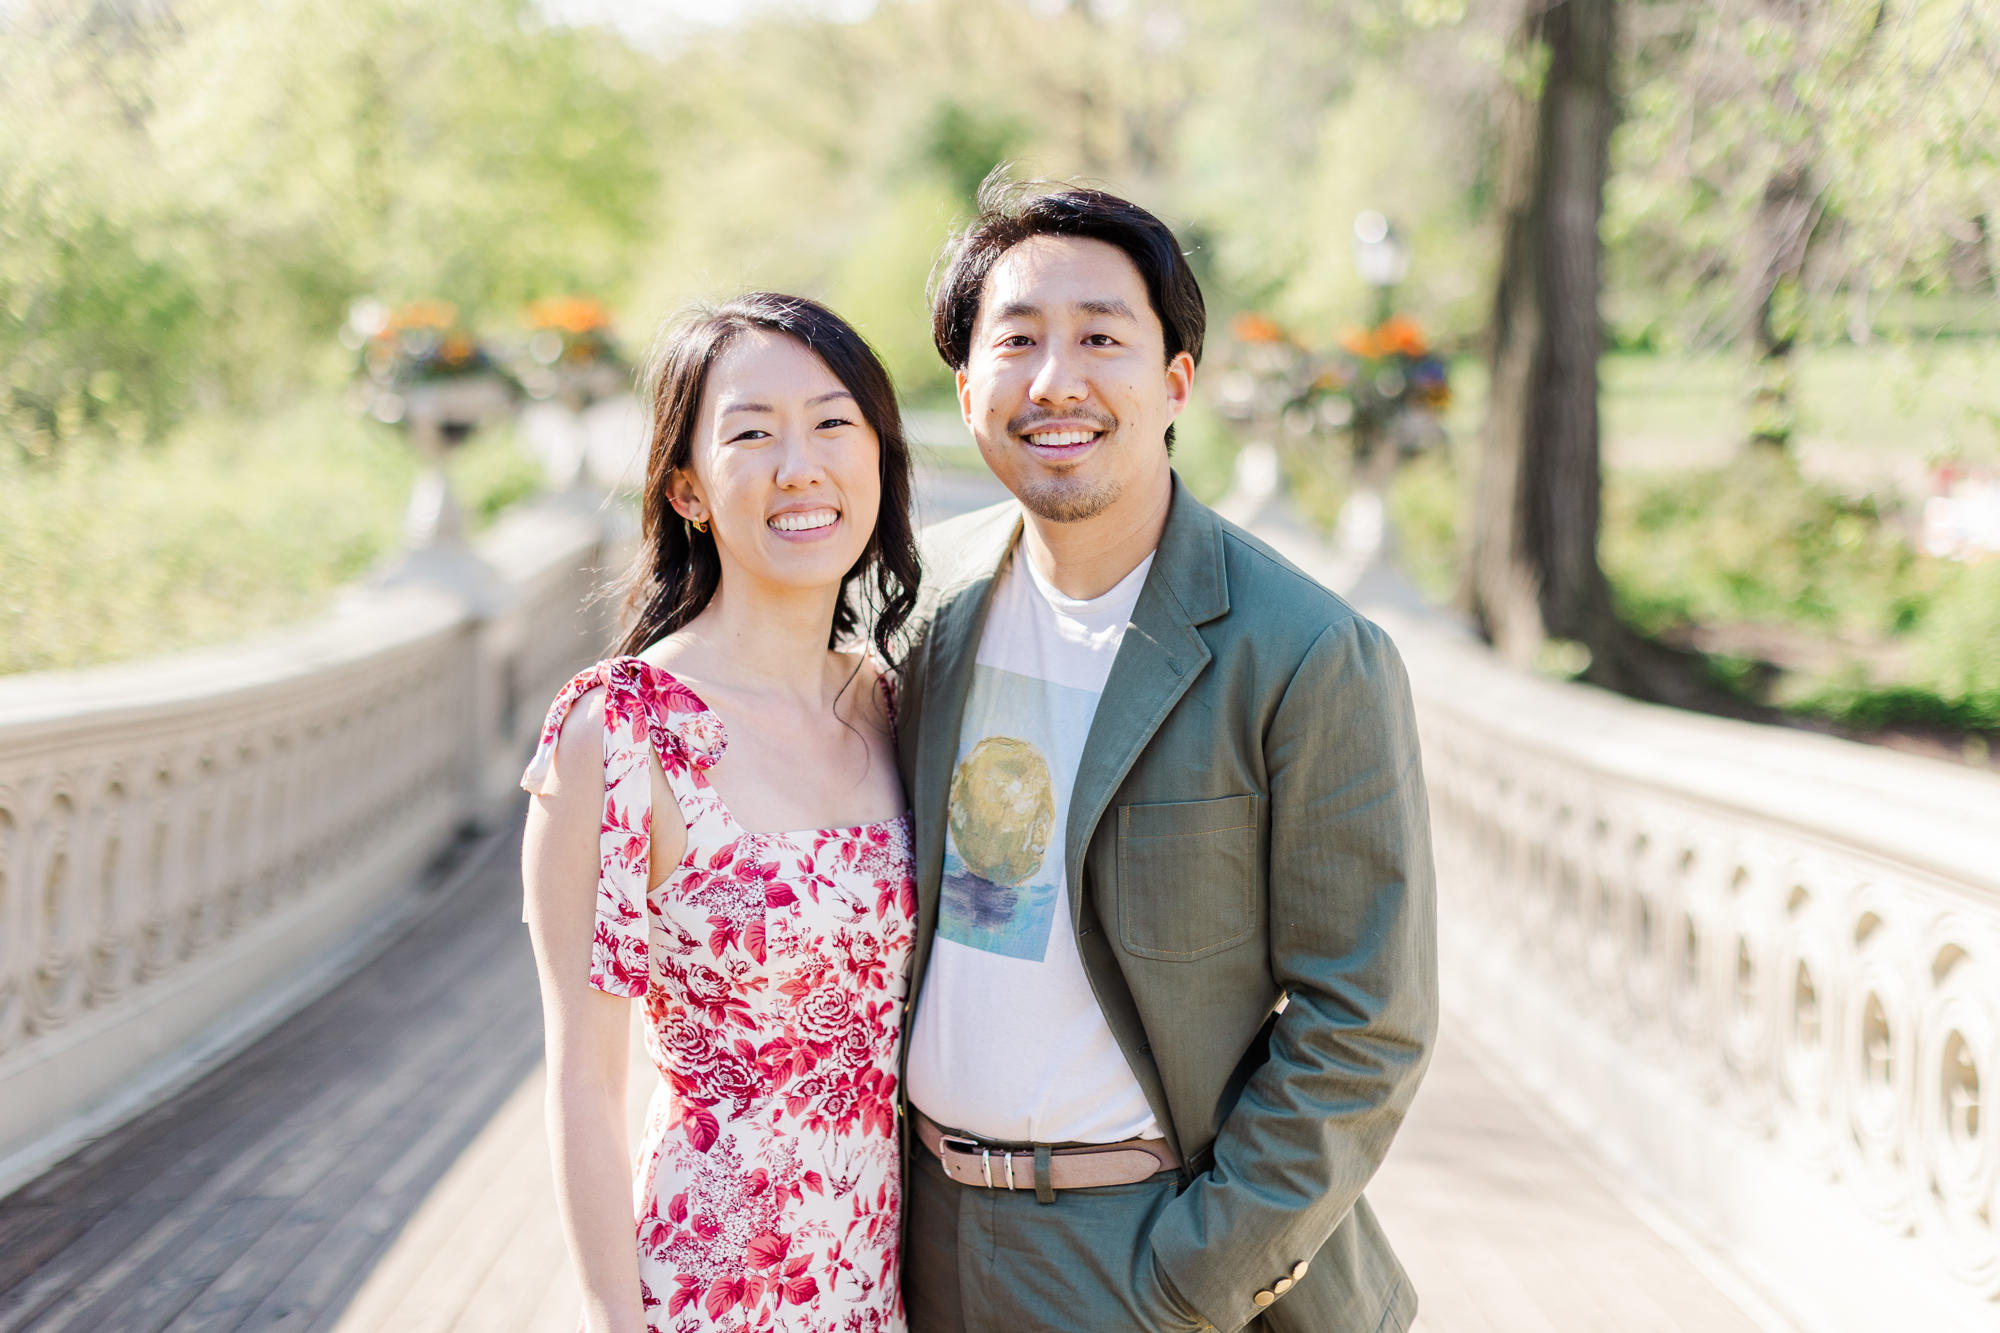 Gorgeous Engagement Photos With Cherry Blossoms in NYC